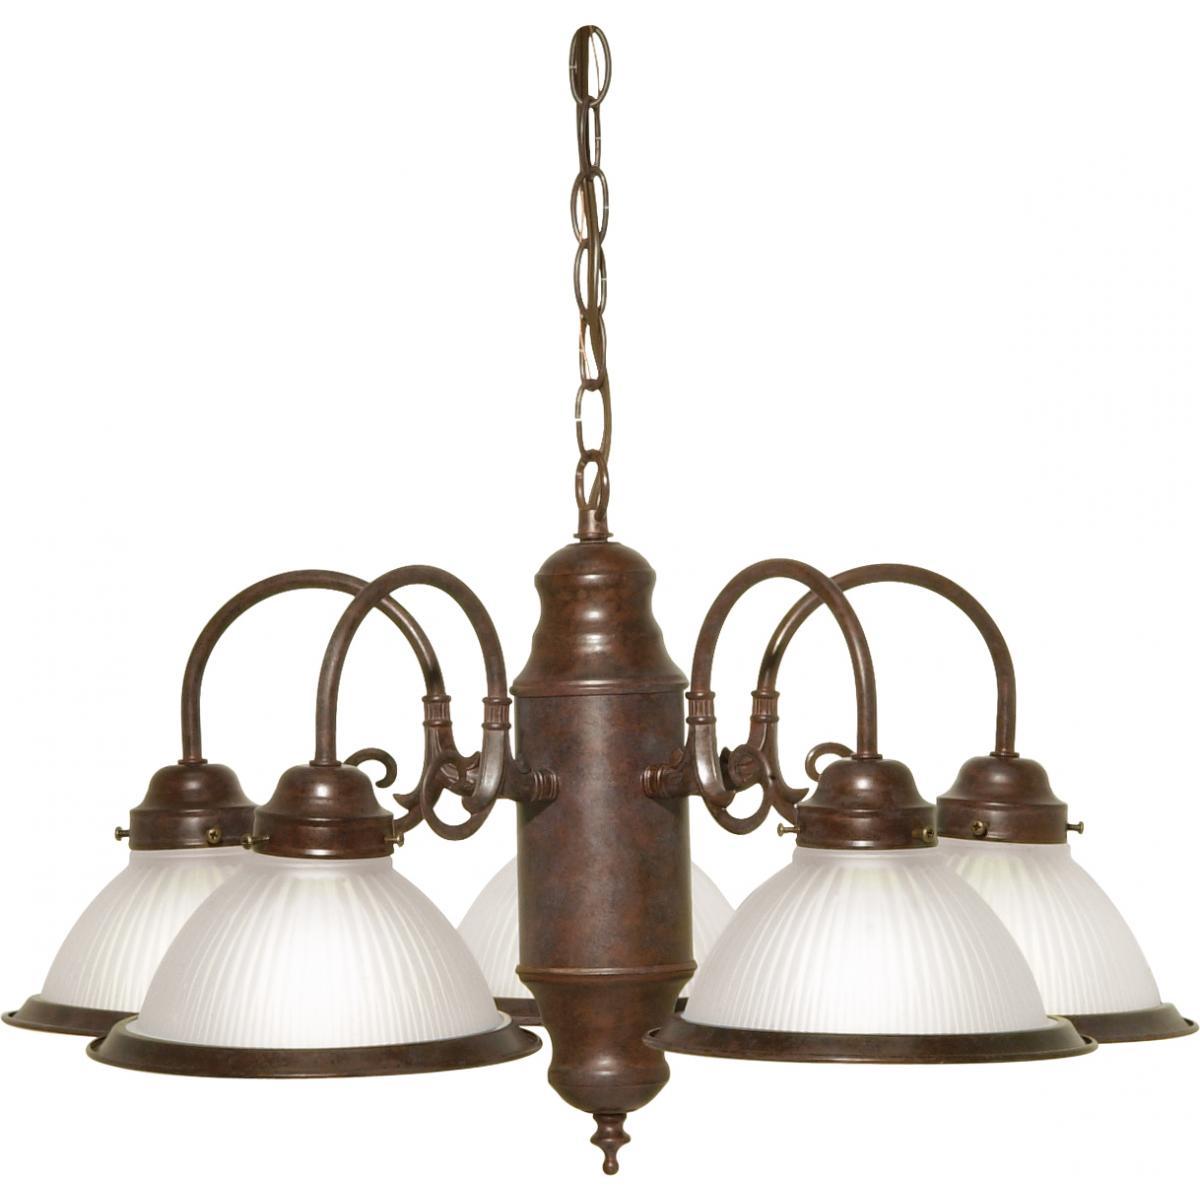 5 Light 22" Chandelier With Frosted Ribbed Shades Ceiling Nuvo Lighting 